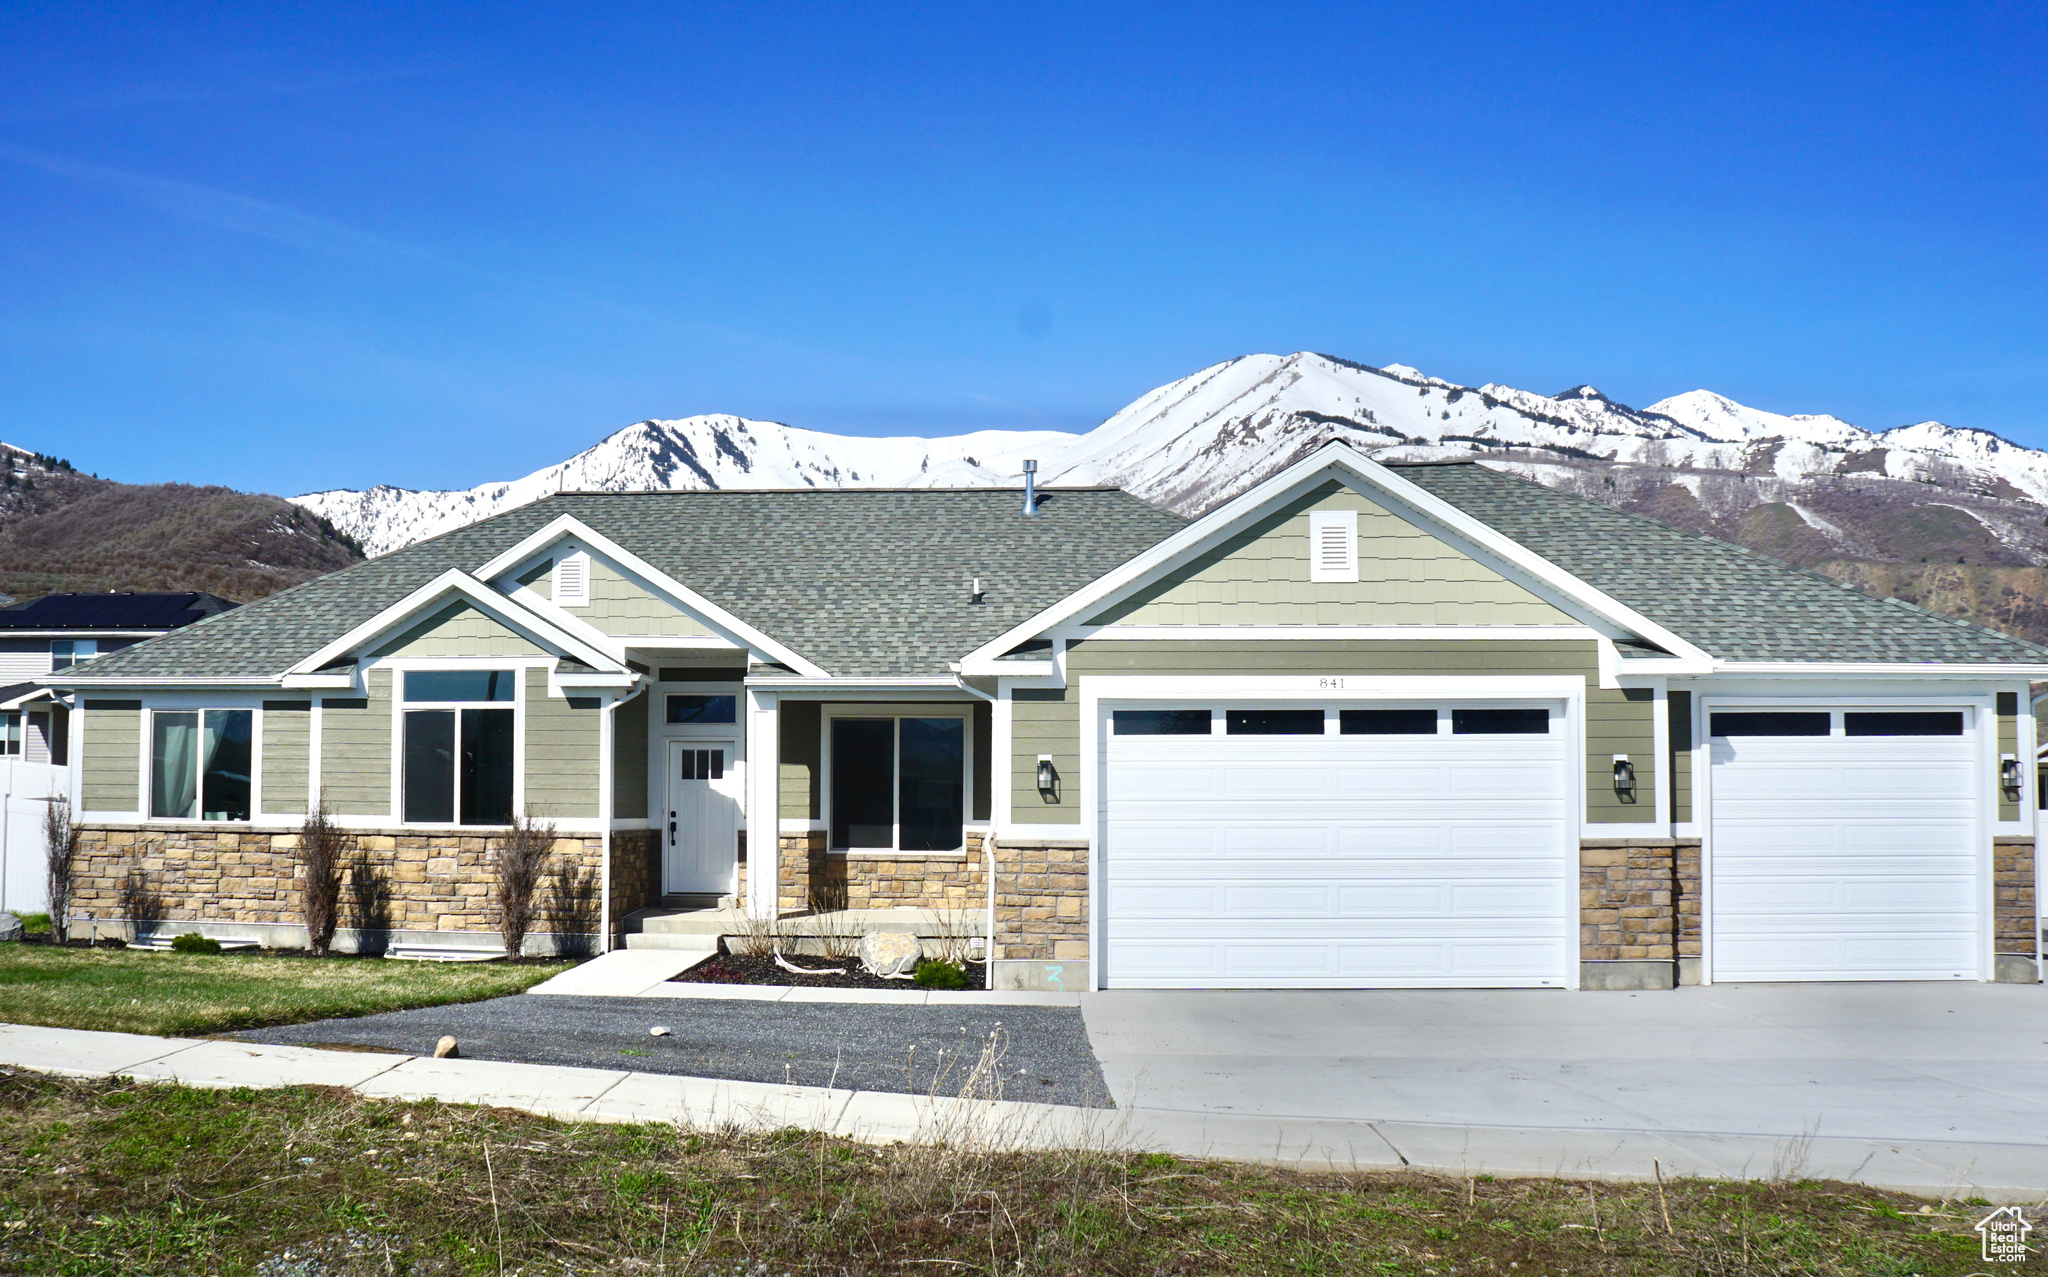 Craftsman-style house with a mountain view and a three-car garage